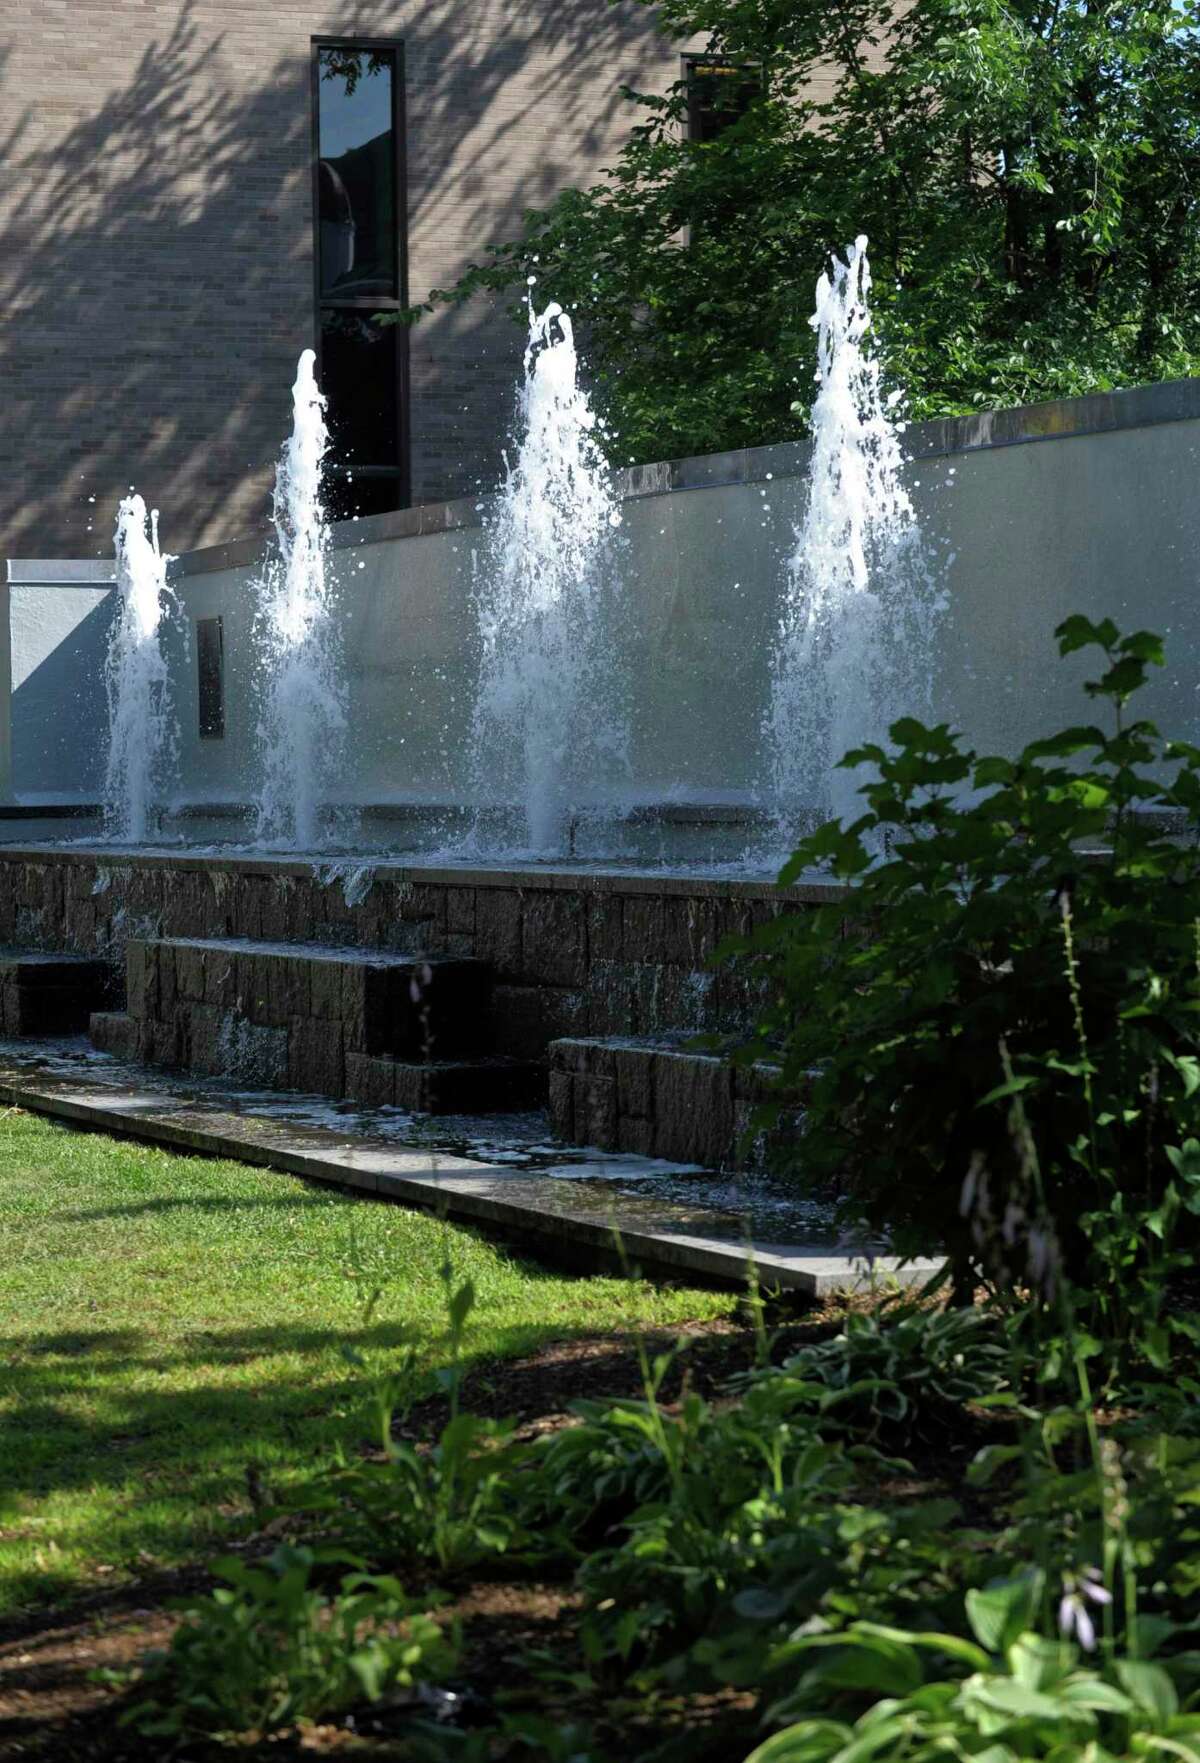 A fountain at the danbury Public Library looks inviting in the late afternoon. The DEEP (Connecticut Department of Energy and Environmental Protection) released an advisory for Monday and Tuesday warning of poor air quality. Monday, July 20, 2015, in Danbury, Conn.